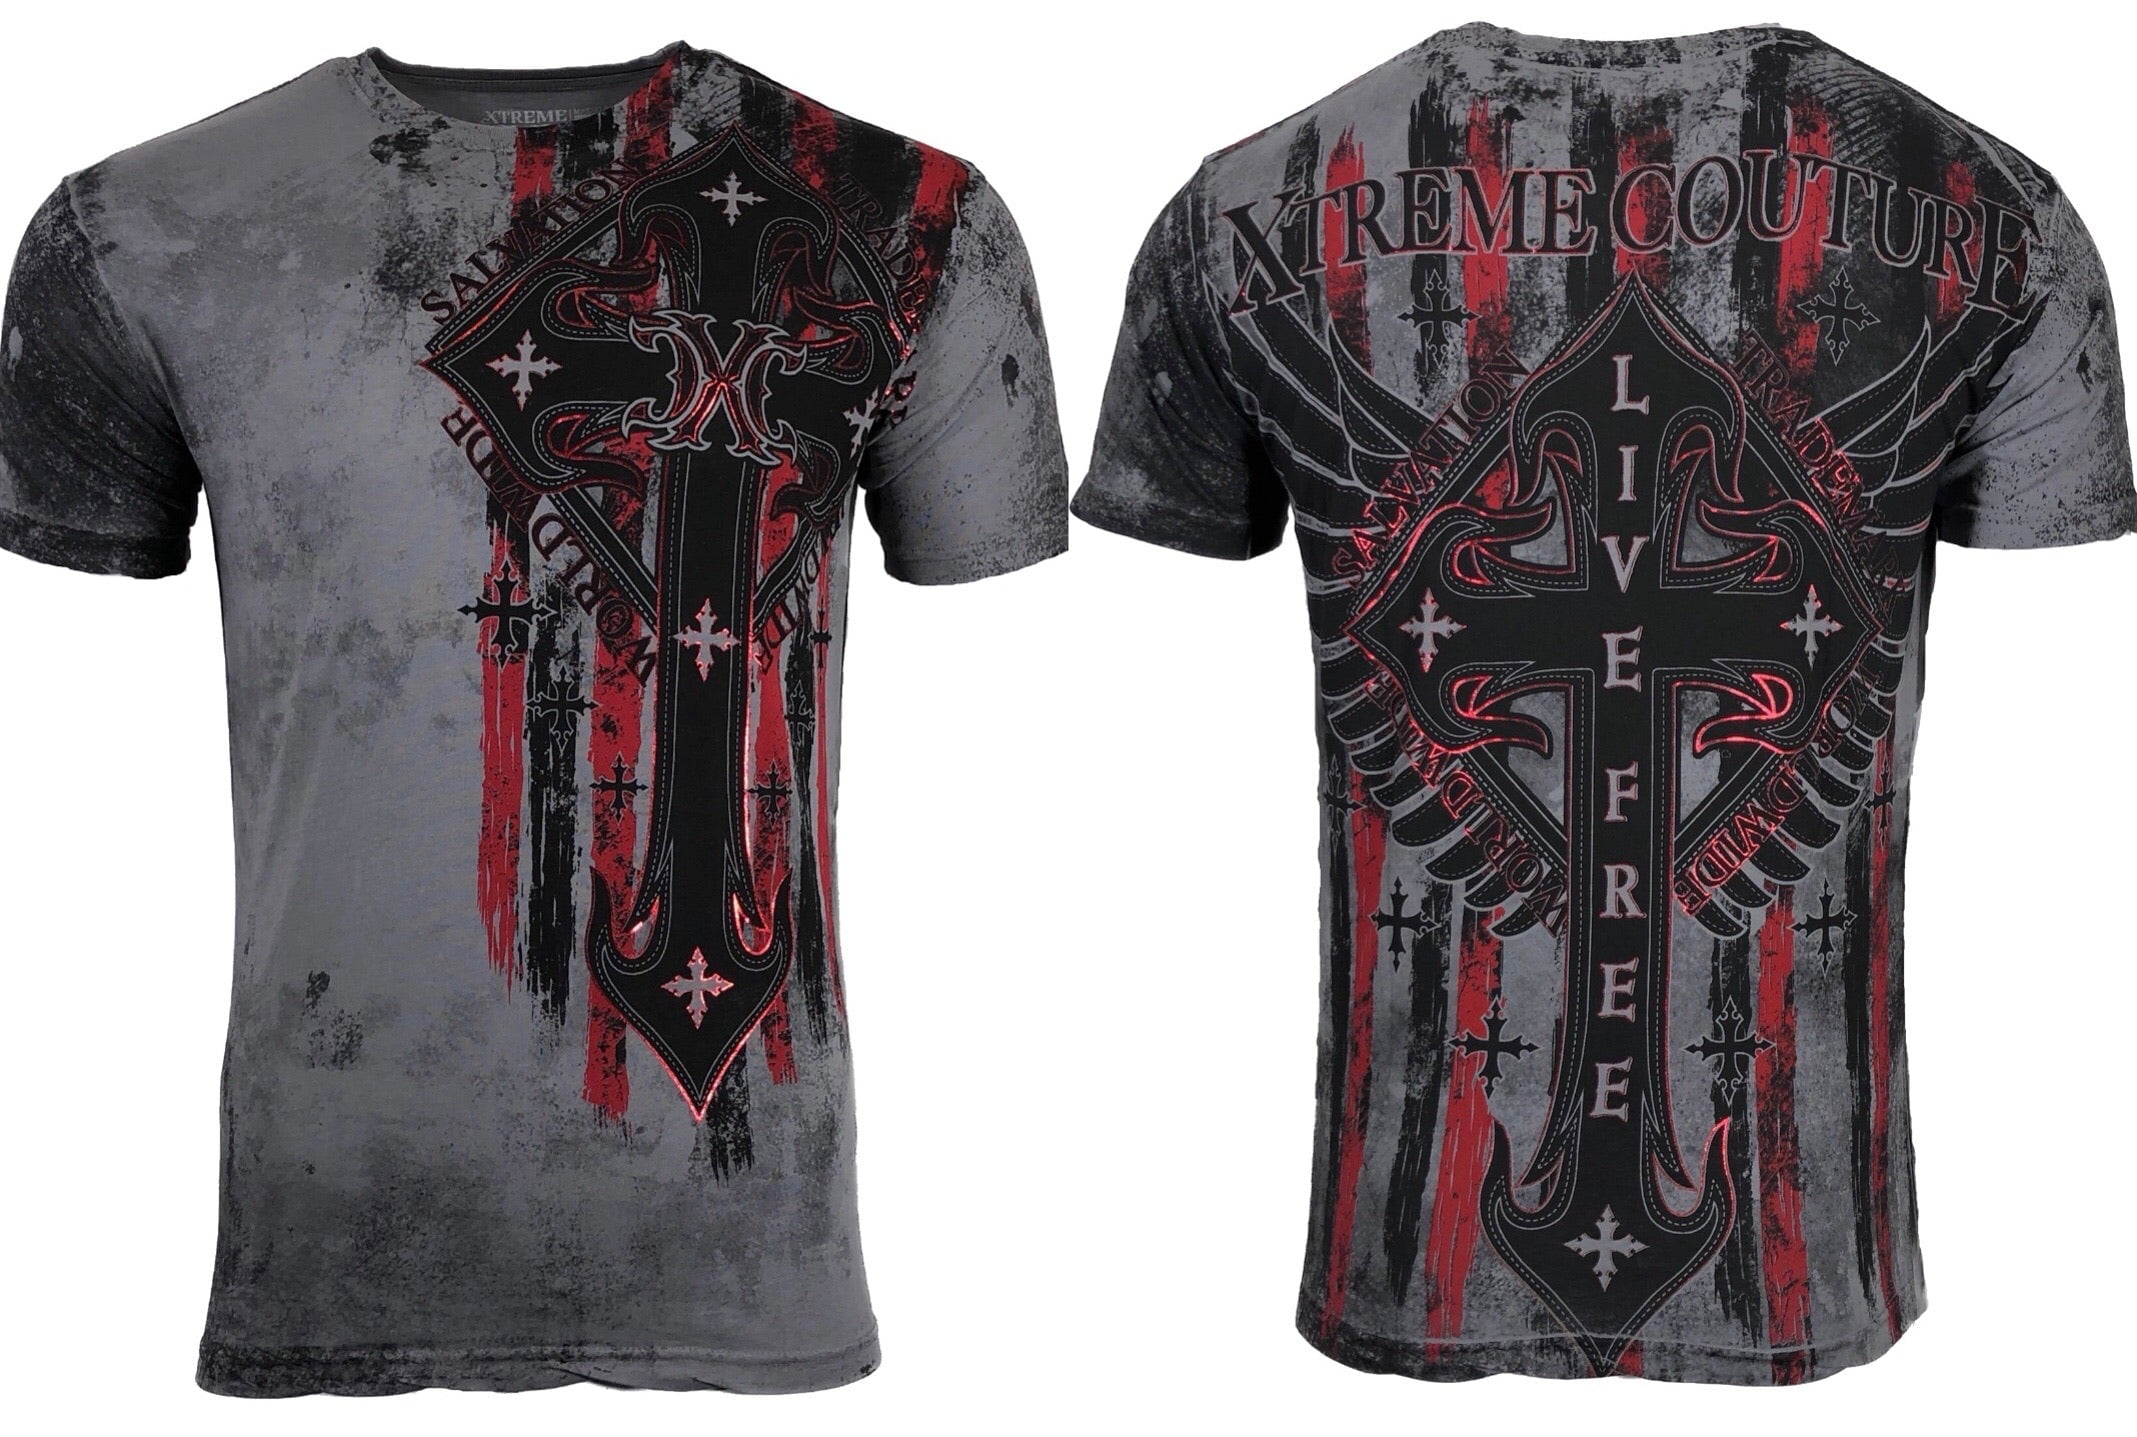 Xtreme Couture By AfflictionMen's T-Shirt LIBERTY CRUSADE Biker ...